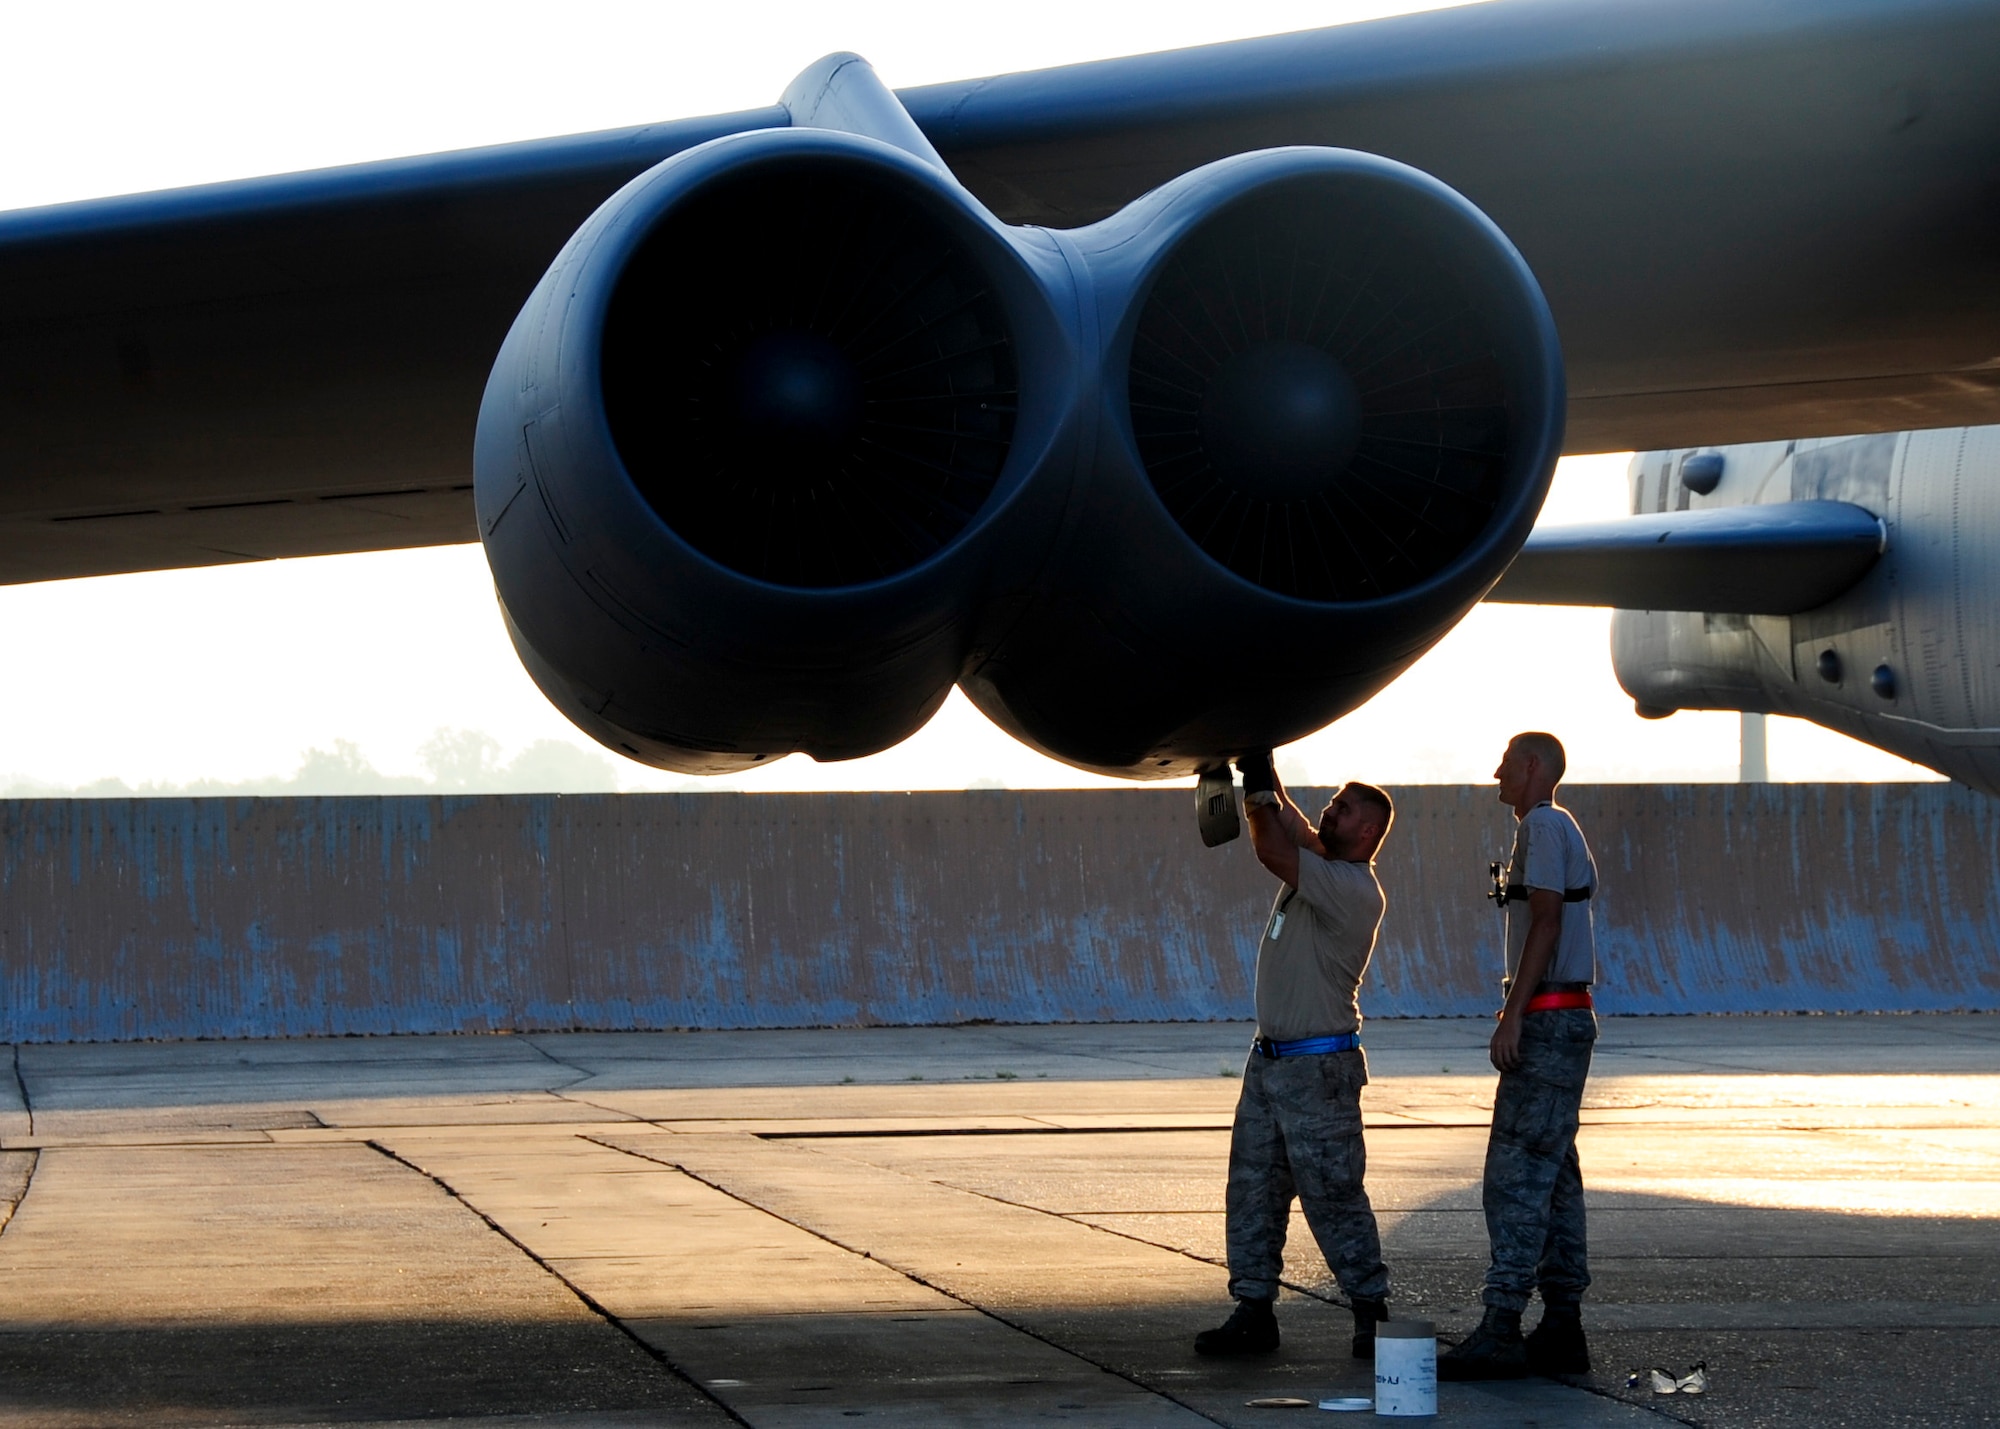 Staff Sgt. Joseph Gamache and Senior Airman Mitchell Dexter, both 2nd Aircraft Maintenance Squadron crew chiefs, load a shotgun cartridge into a B-52H Stratofortress engine during a Minimal Interval Takeoff on Barksdale Air Force Base, La., Aug. 14, 2014. A MITO uses shotgun cartridges, filled with gun powder, to rapidly start all eight engines on a B-52H Stratofortress. This allows the B-52 to takeoff at a momentÕs notice if called upon to do so. (U.S. Air Force photo/Airman 1st Class Mozer Da Cunha)
